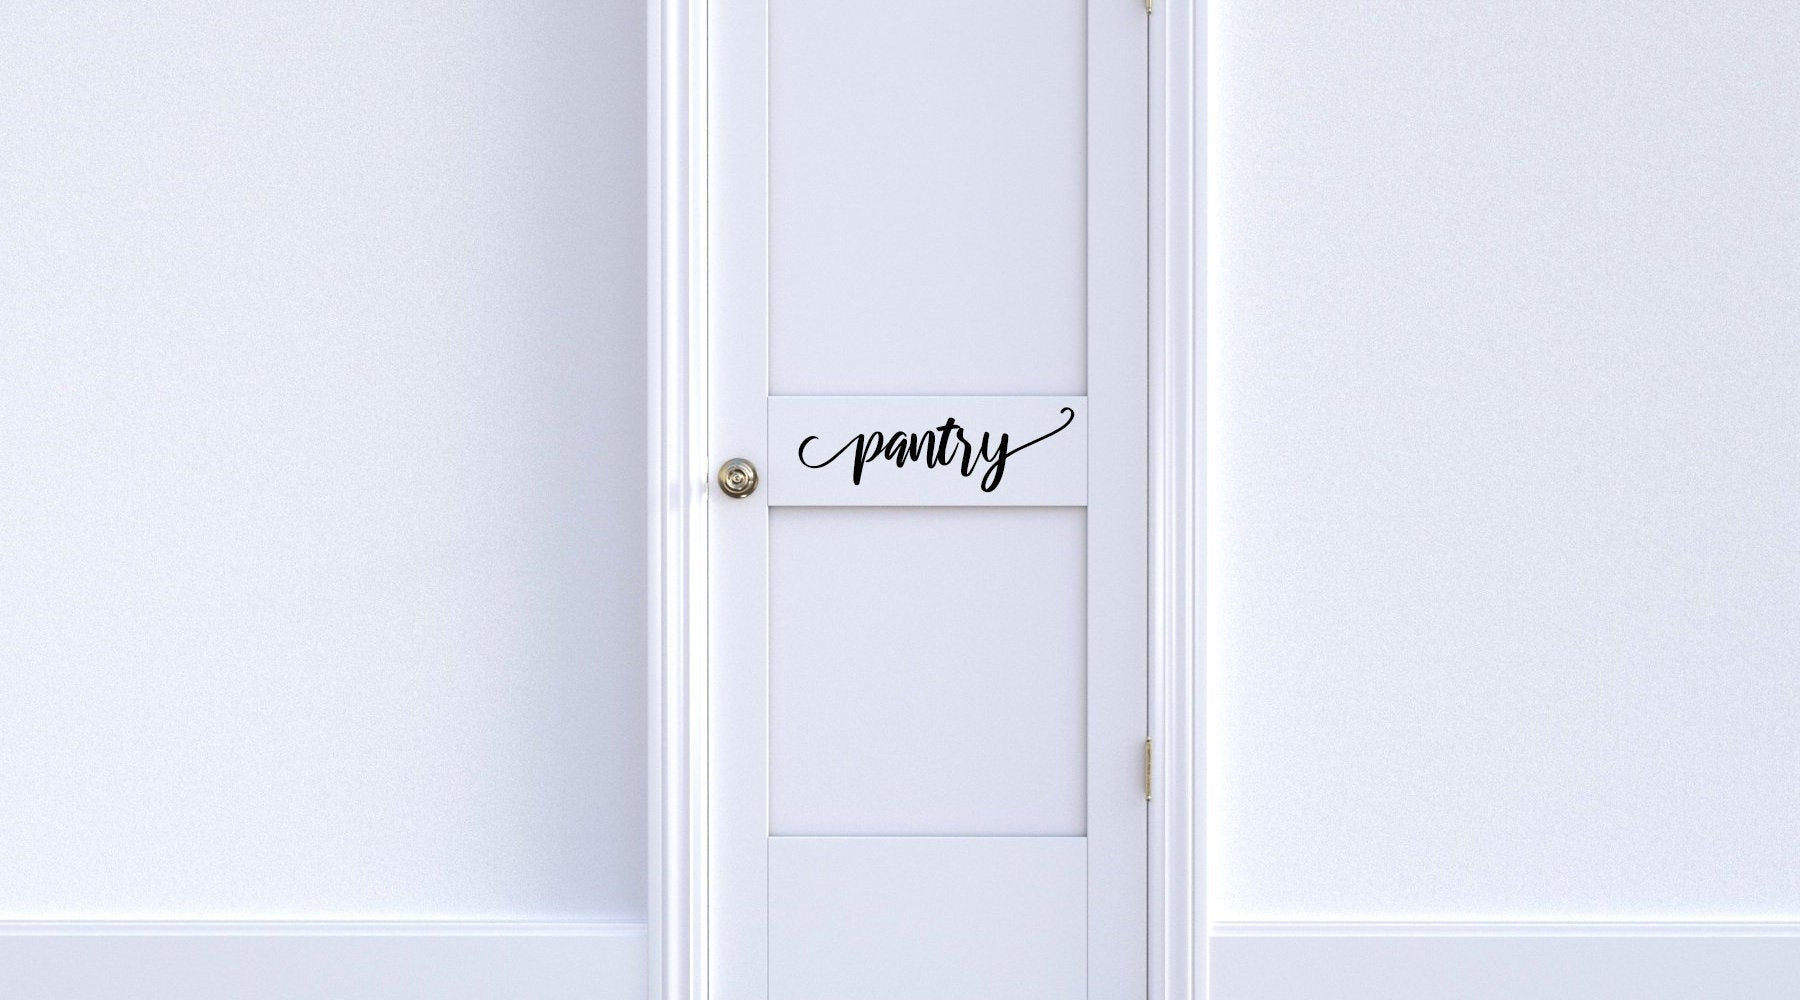 Pantry Vinyl Decal for Pantry Door, Rooms, Kitchen, Wall Decor, Home Organization and More, Horizontal Sticker!